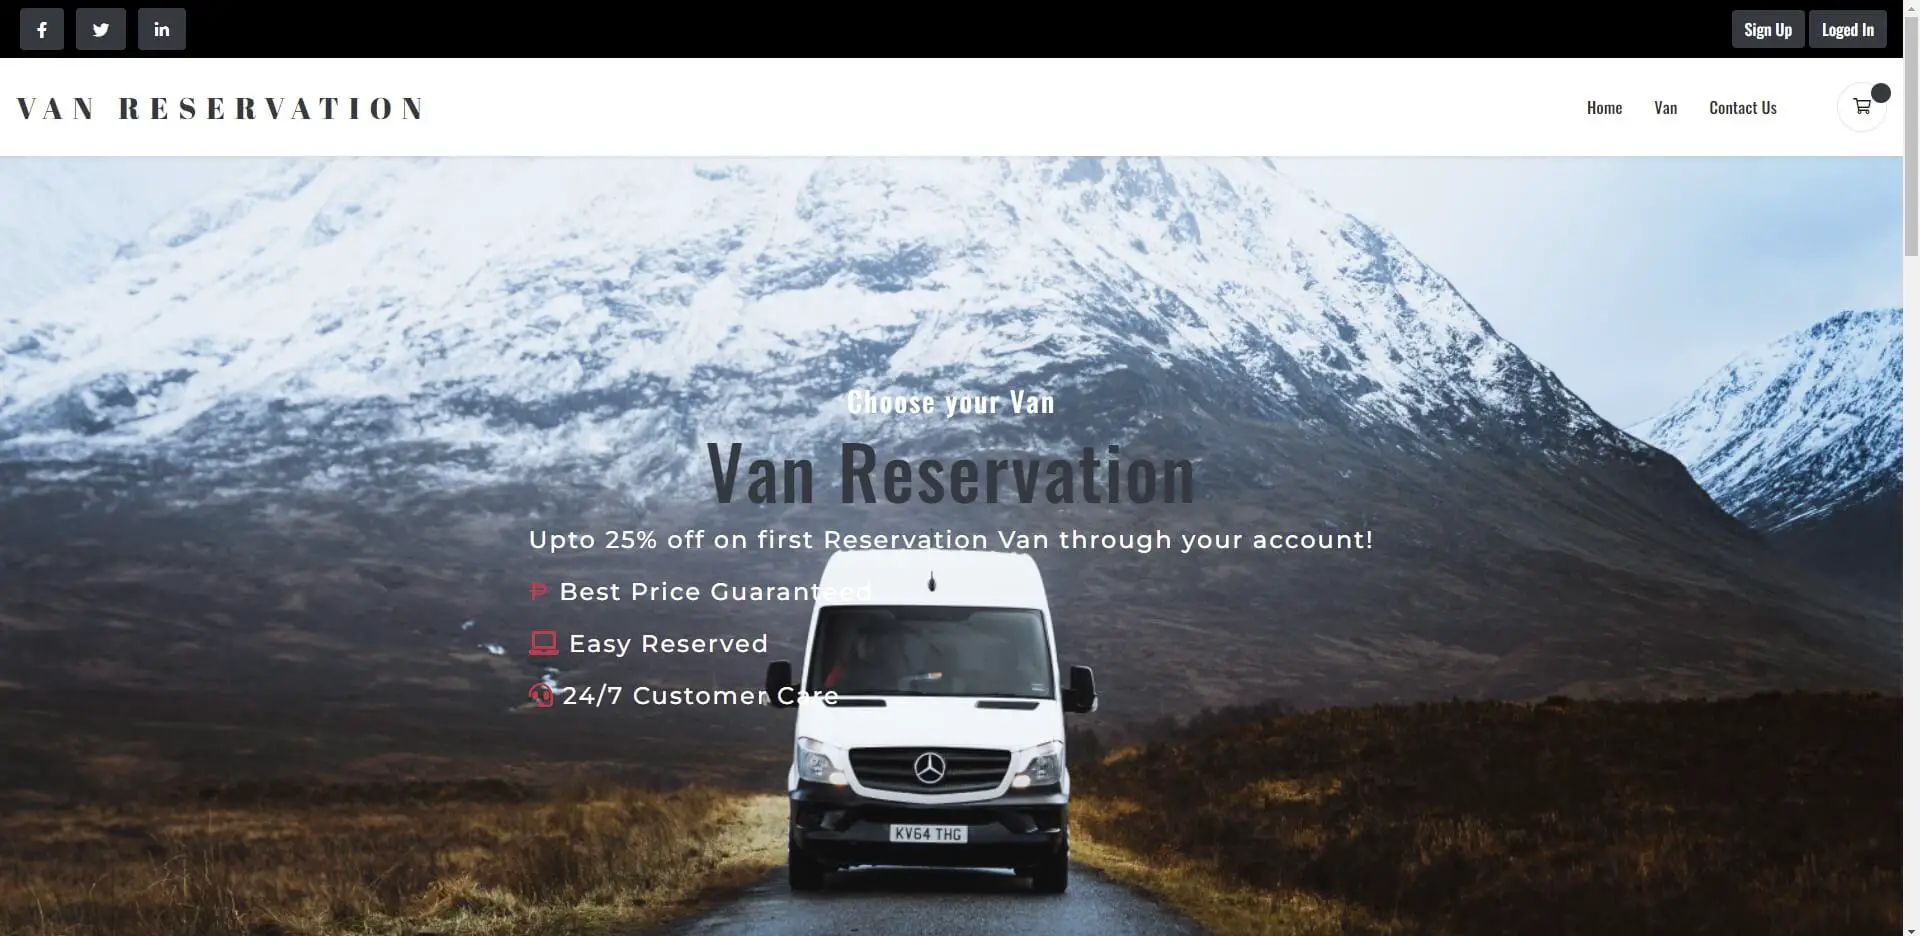 Van Reservation using PHP with Email Verification - Front-end